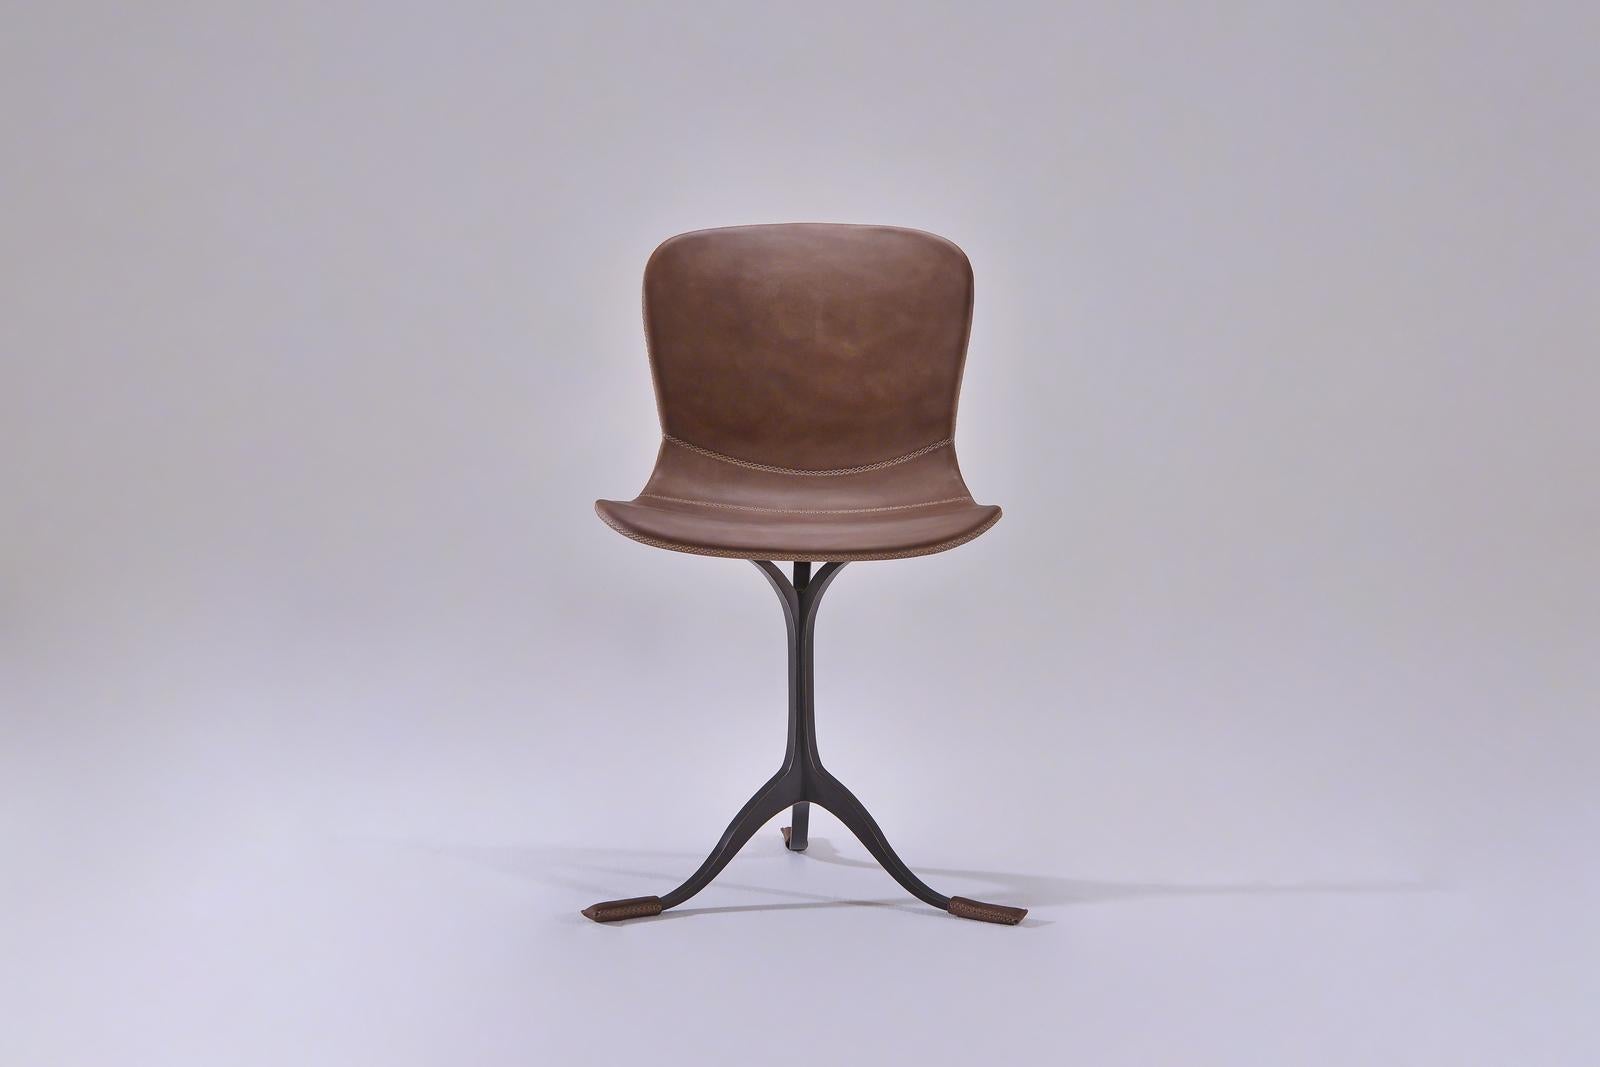 Model: 2x PT40
Seat: Leather
Seat color: Truffe (Dark Brown)
Base: Sand cast brass
Base finish: Brushed Brown
Dimensions: 43 x 52 x 79 cm; Seat height 46cm 
(W x D x H) 16.92 x 20.27 x 31.1 inch; Seat height 18.11 inch

P. Tendercool chairs and